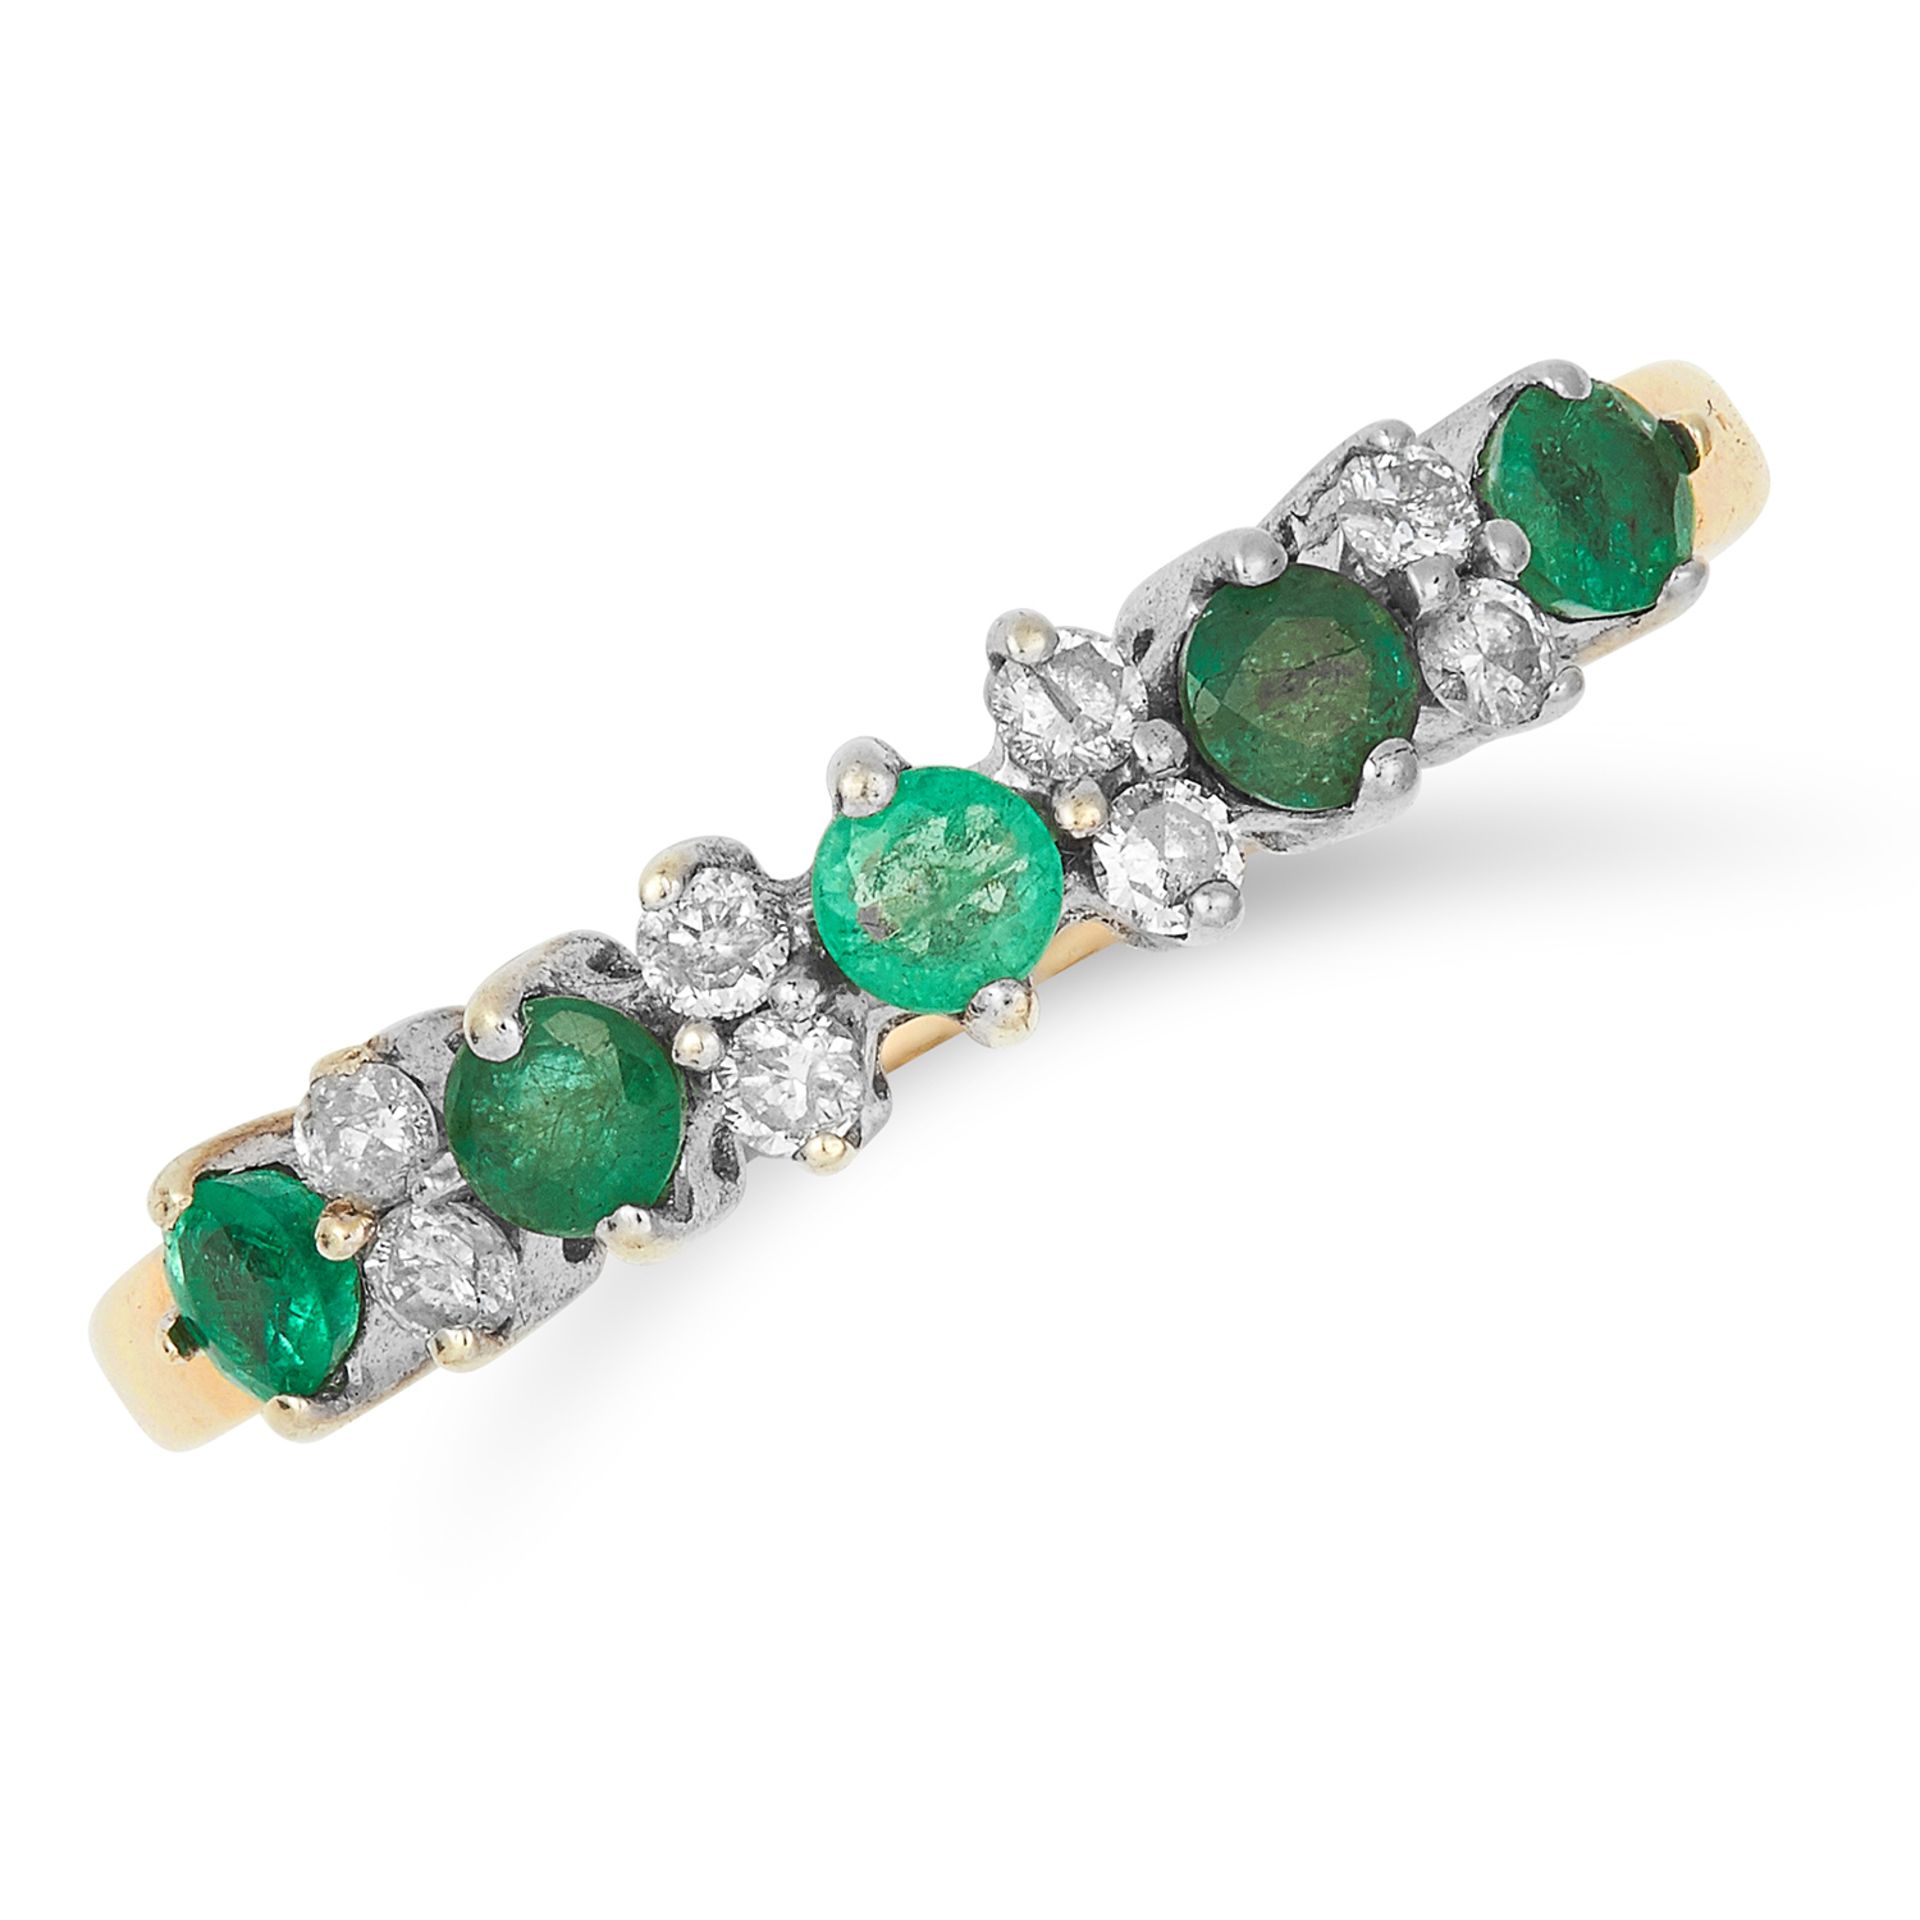 EMERALD AND DIAMOND RING set with alternating round cut emeralds and diamonds, size Q / 8, 2.2g.